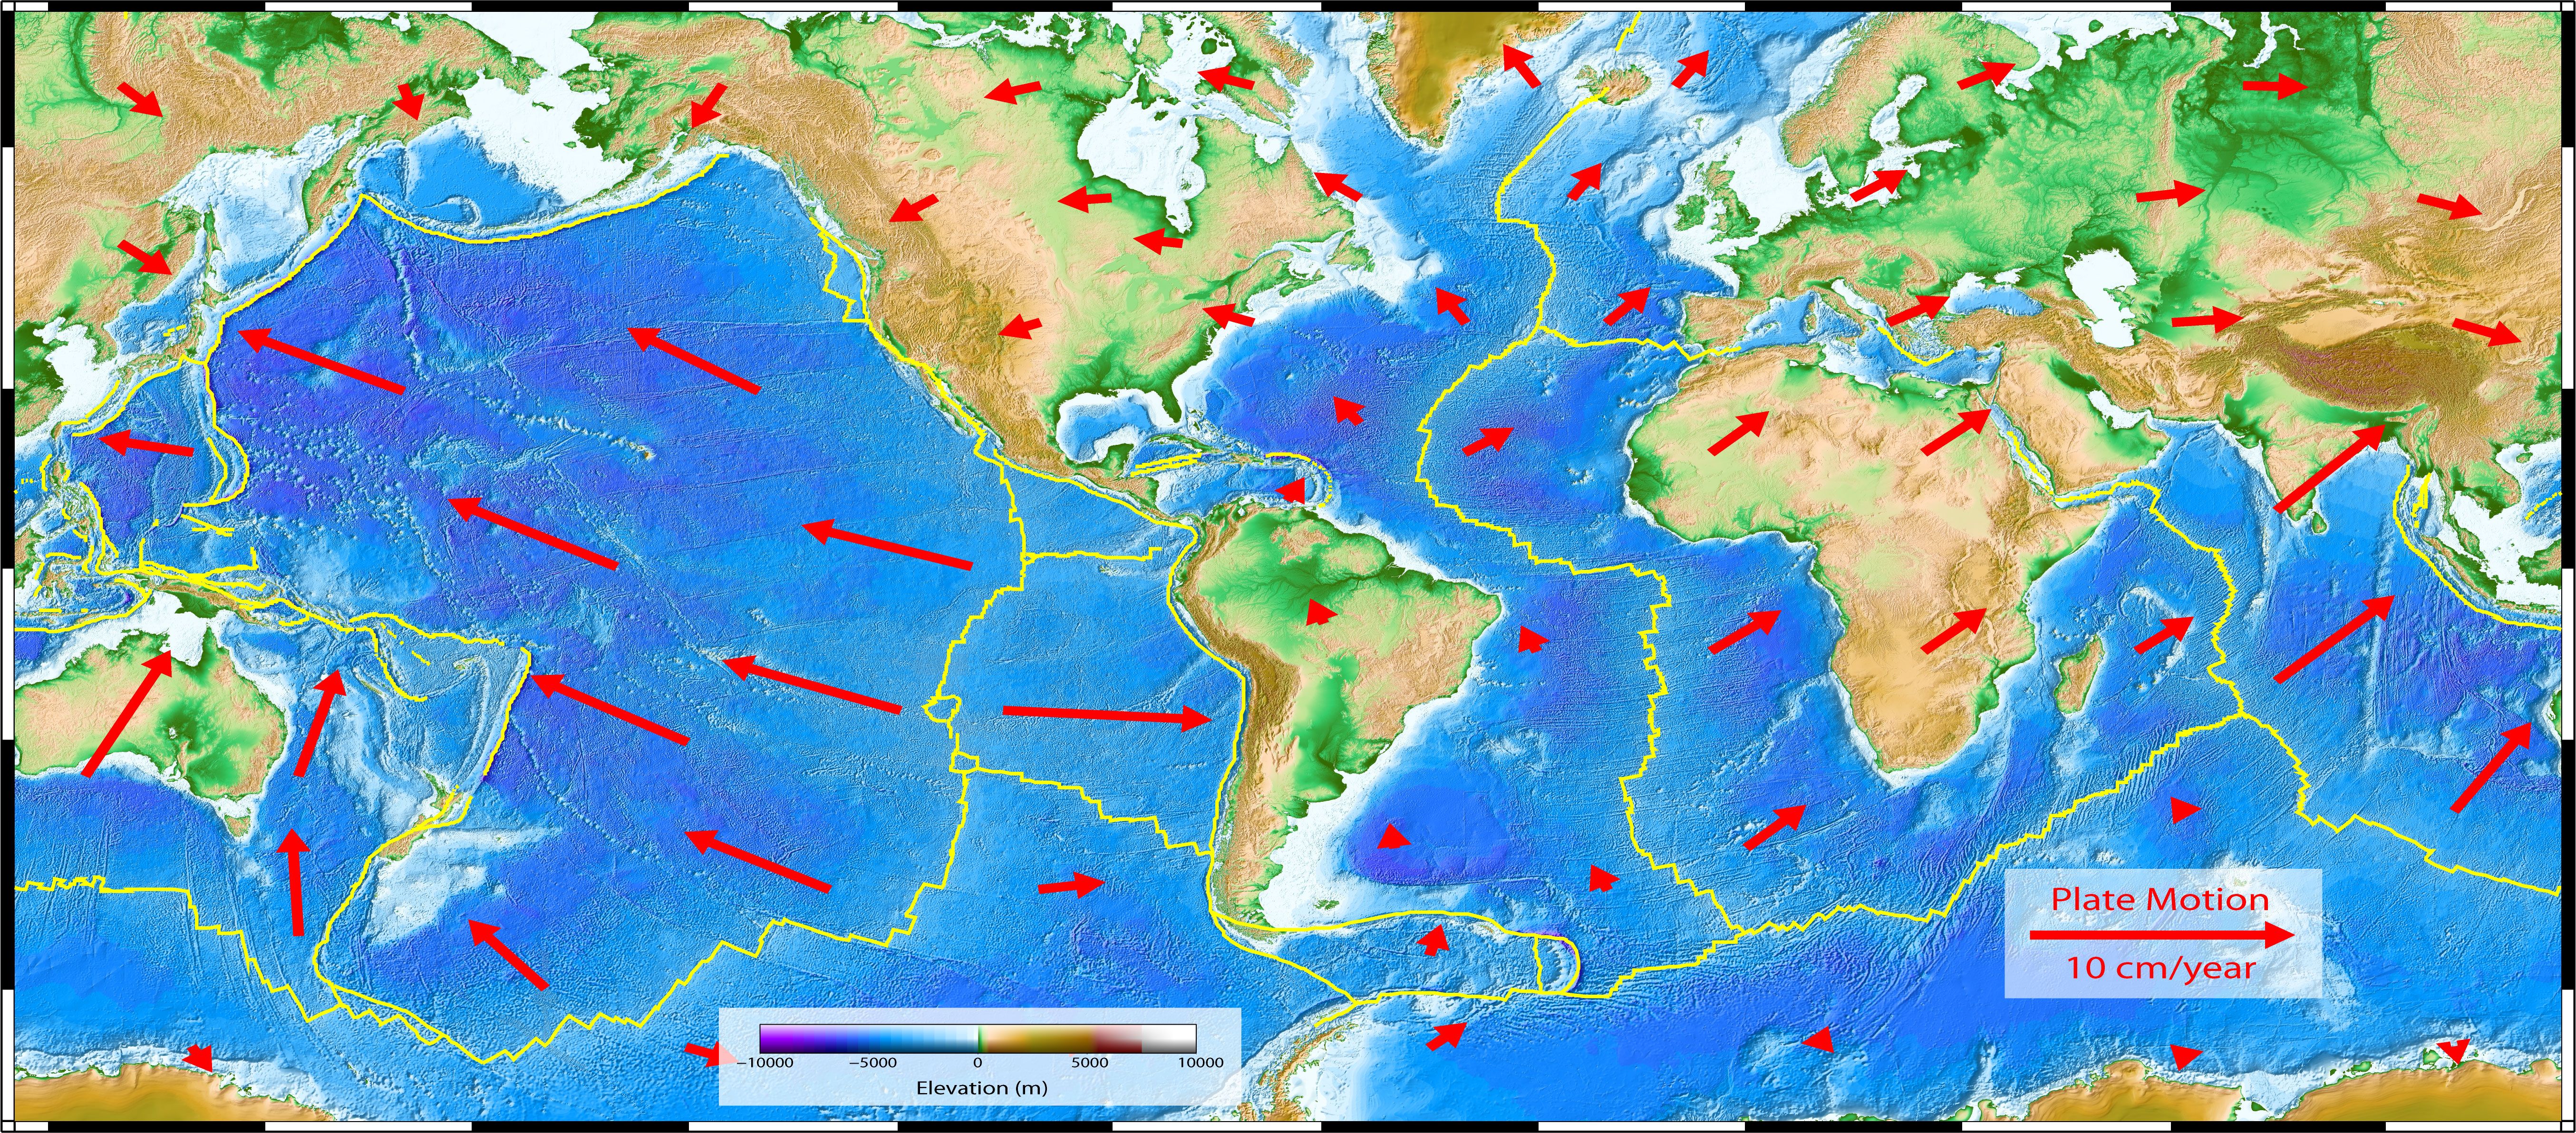 Plate Tectonics: The Ends (and Beginnings) of the Earth, PART 2